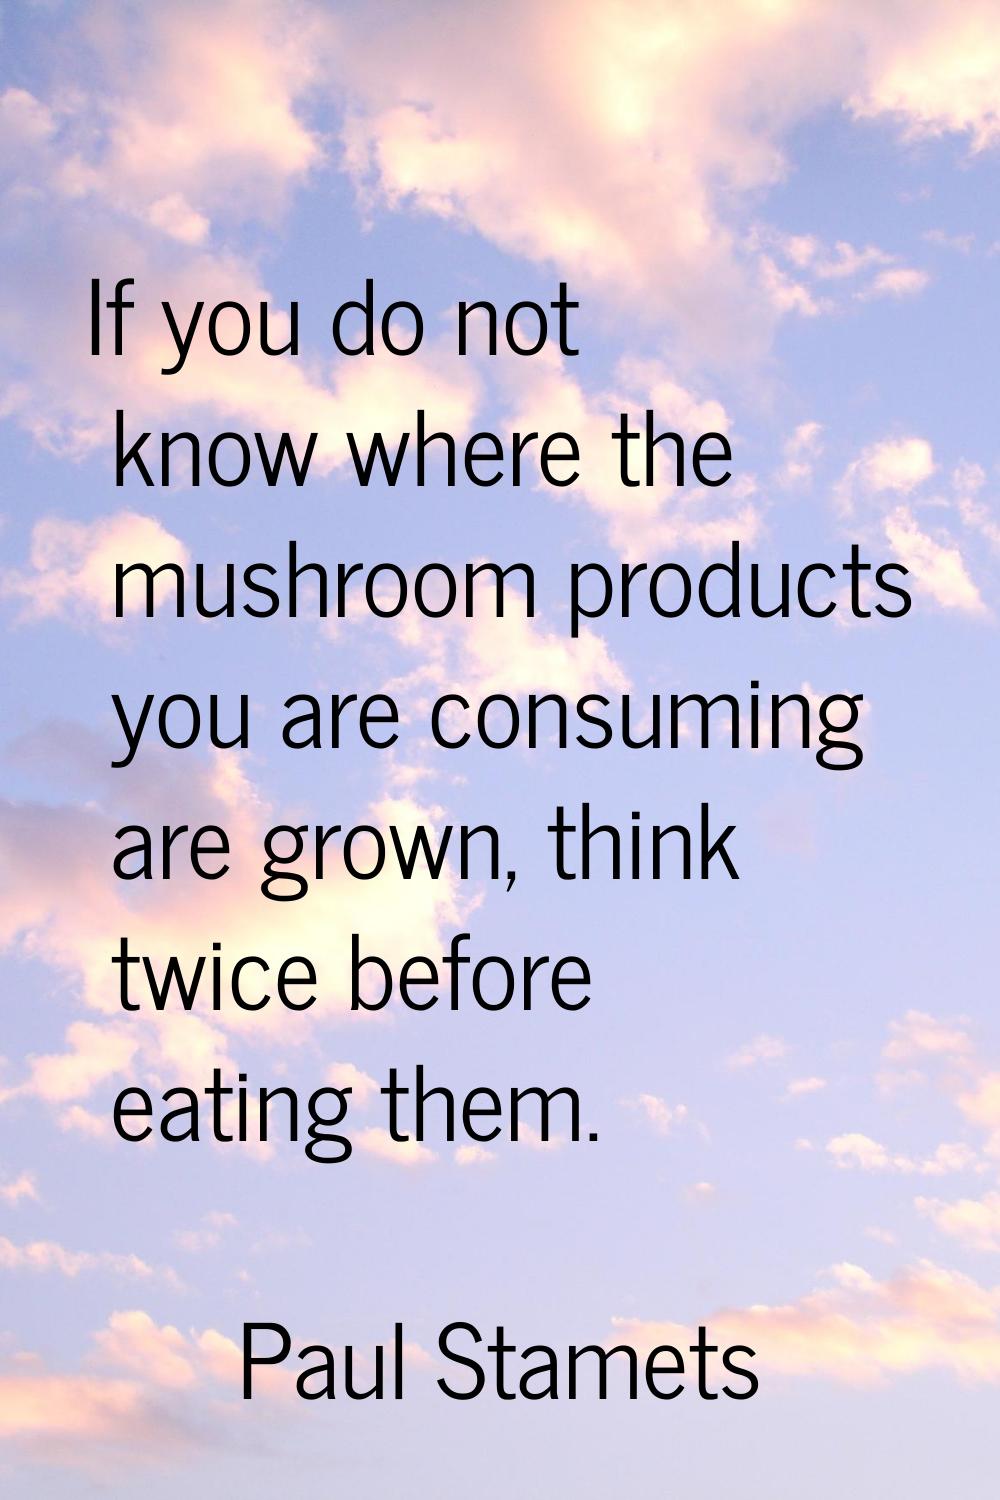 If you do not know where the mushroom products you are consuming are grown, think twice before eati